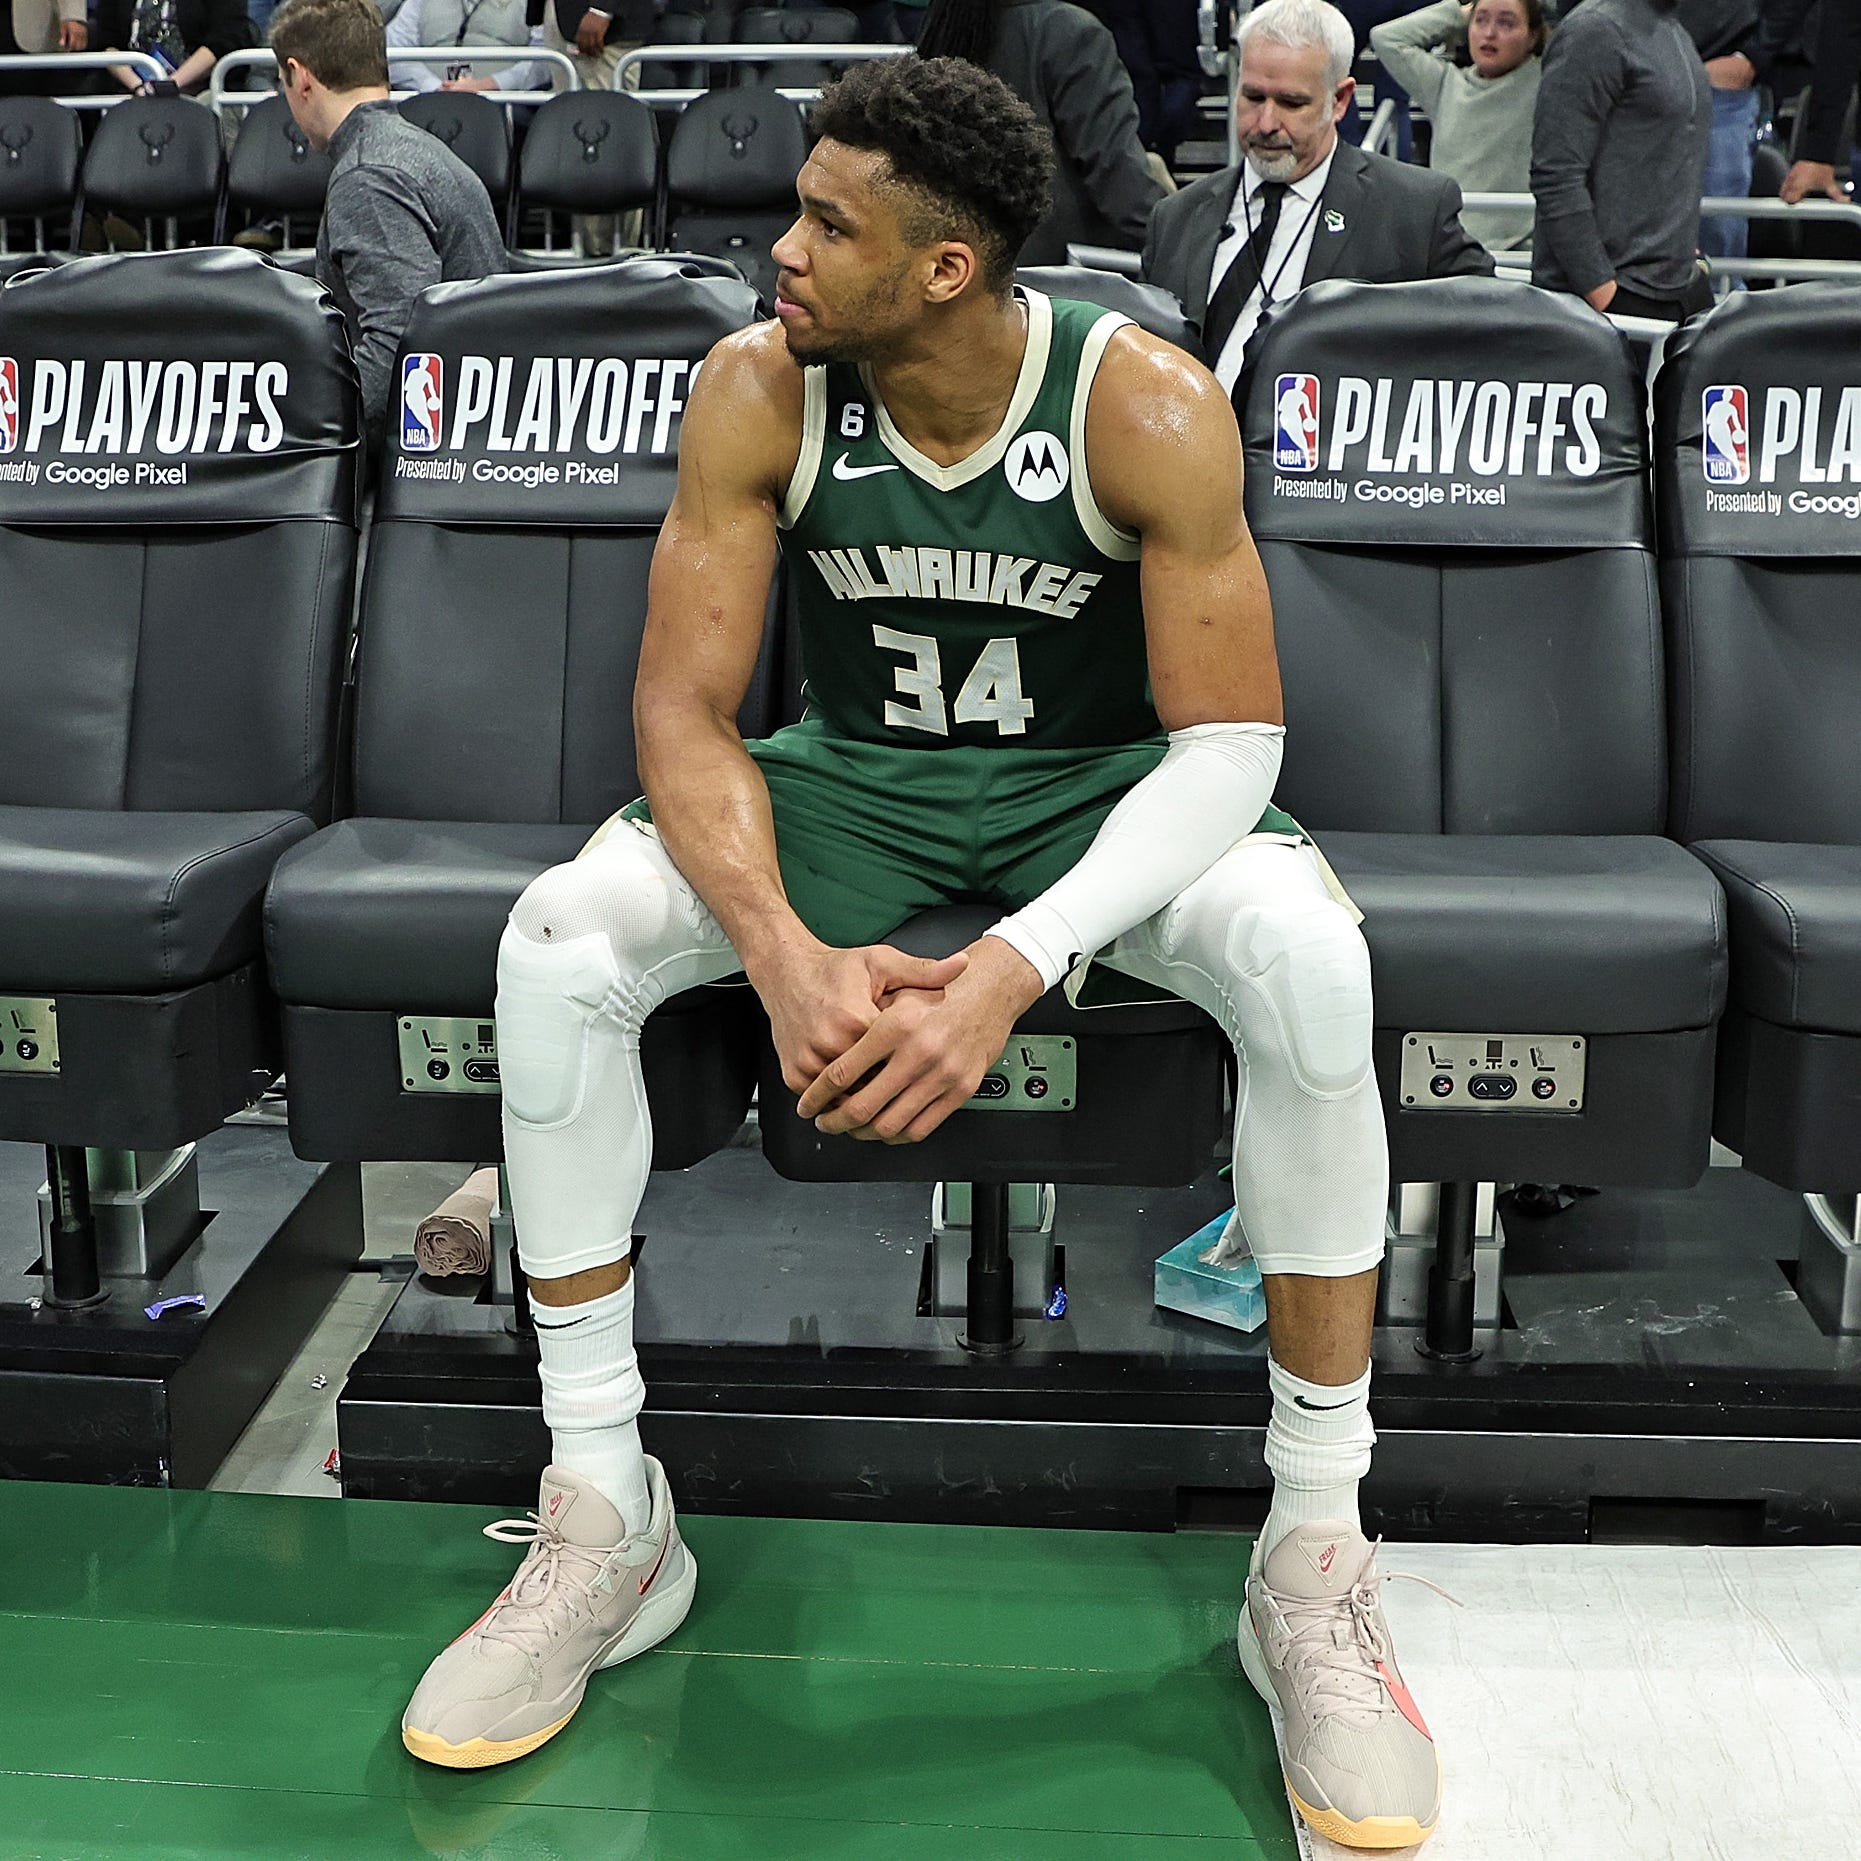 Giannis Antetokounmpo sits on the bench after the Bucks were eliminated from the first round of the playoffs.